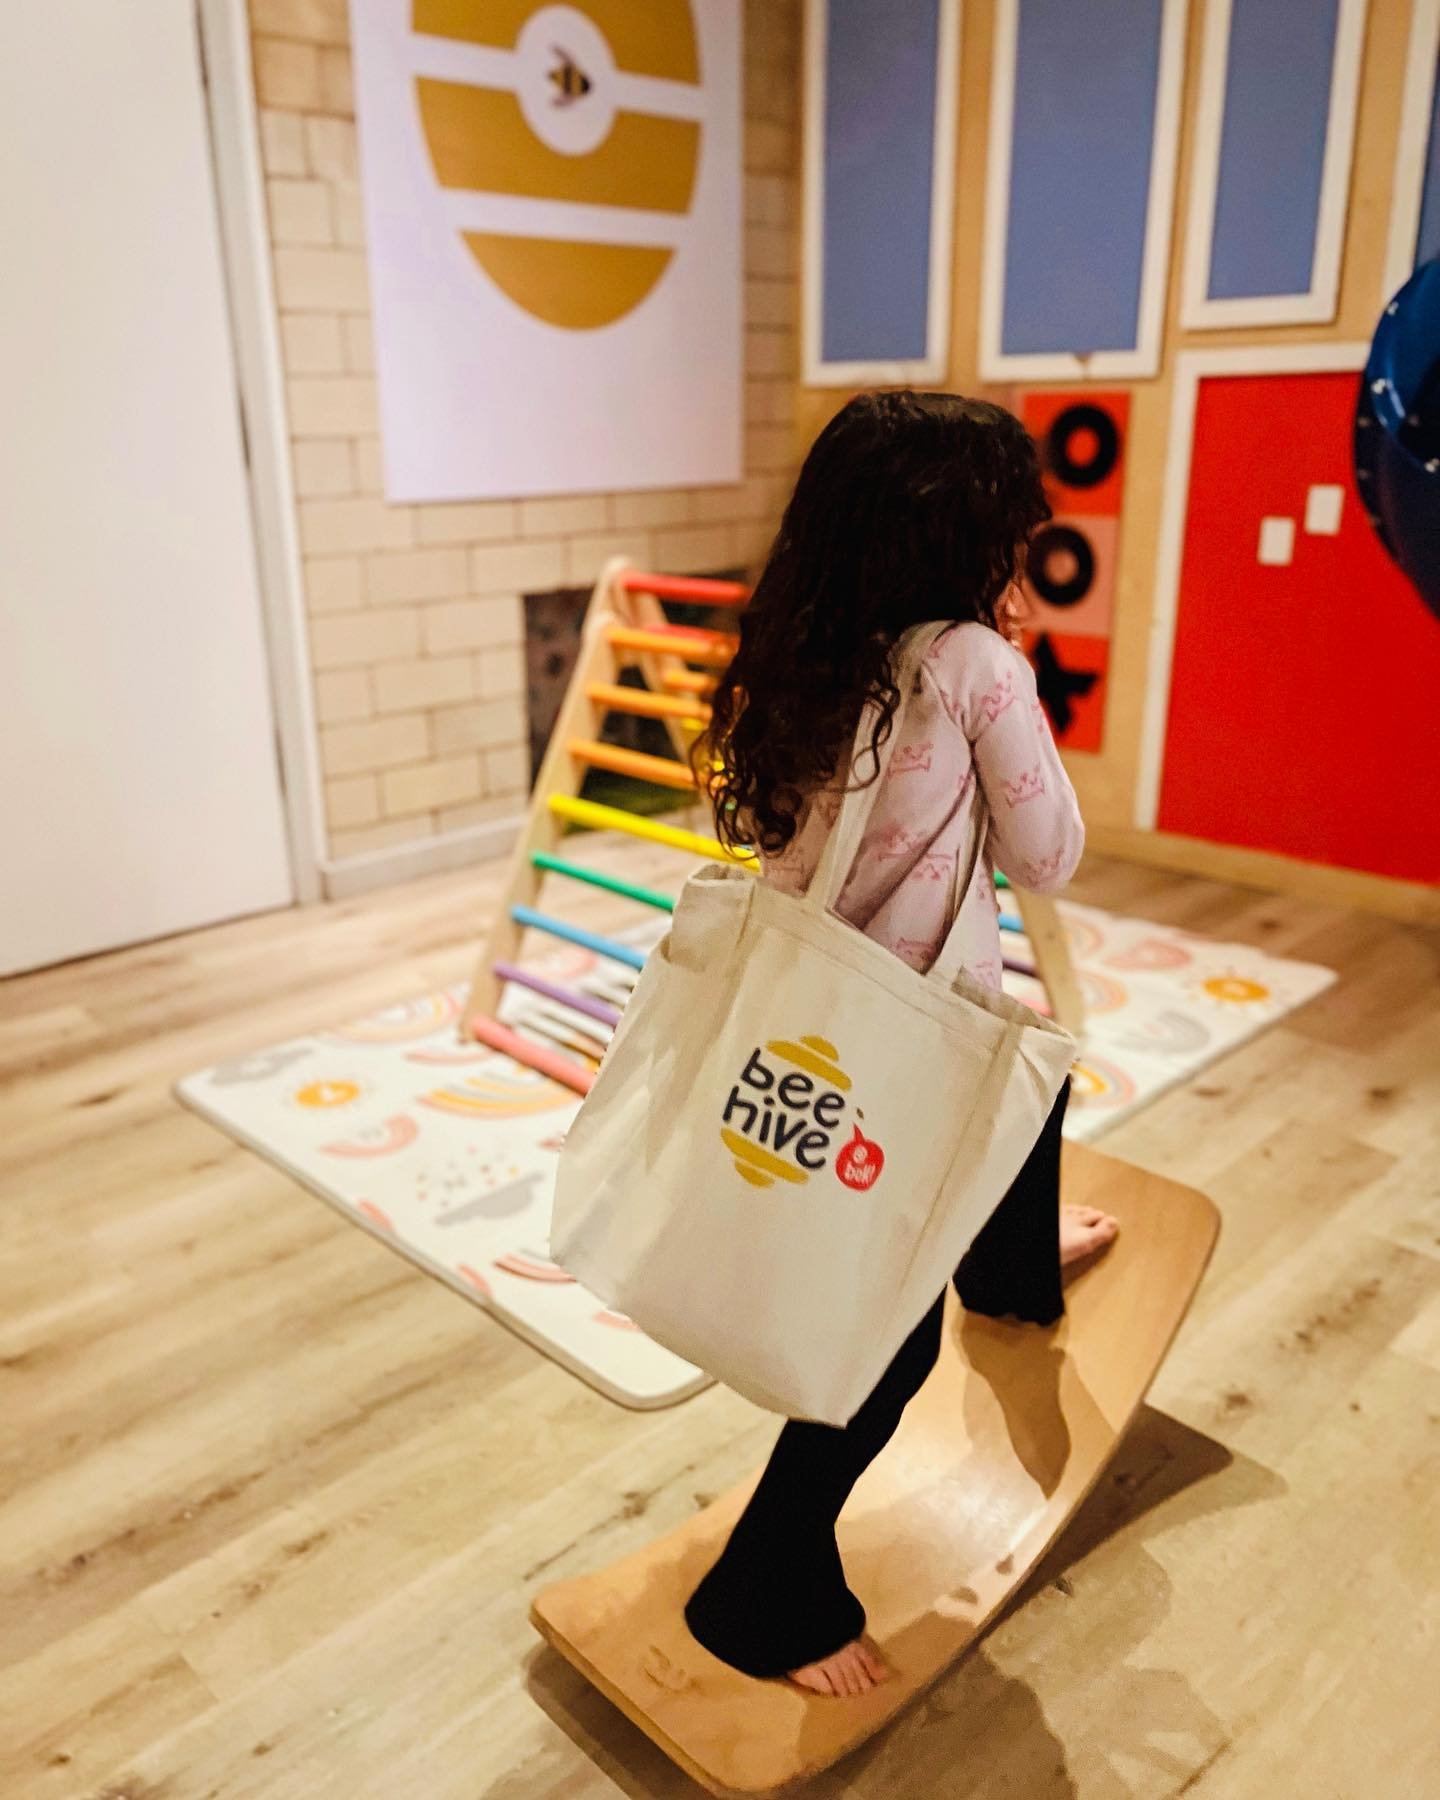 Beehive tote modeled by my babe while on a wavy board 🌻🐝

I made a t-shirt for myself for fun a while back (and one for a sweet kiddo that frequents our space) and then a few friends/ family asked for one! So now we have tees for toddlers up to gro